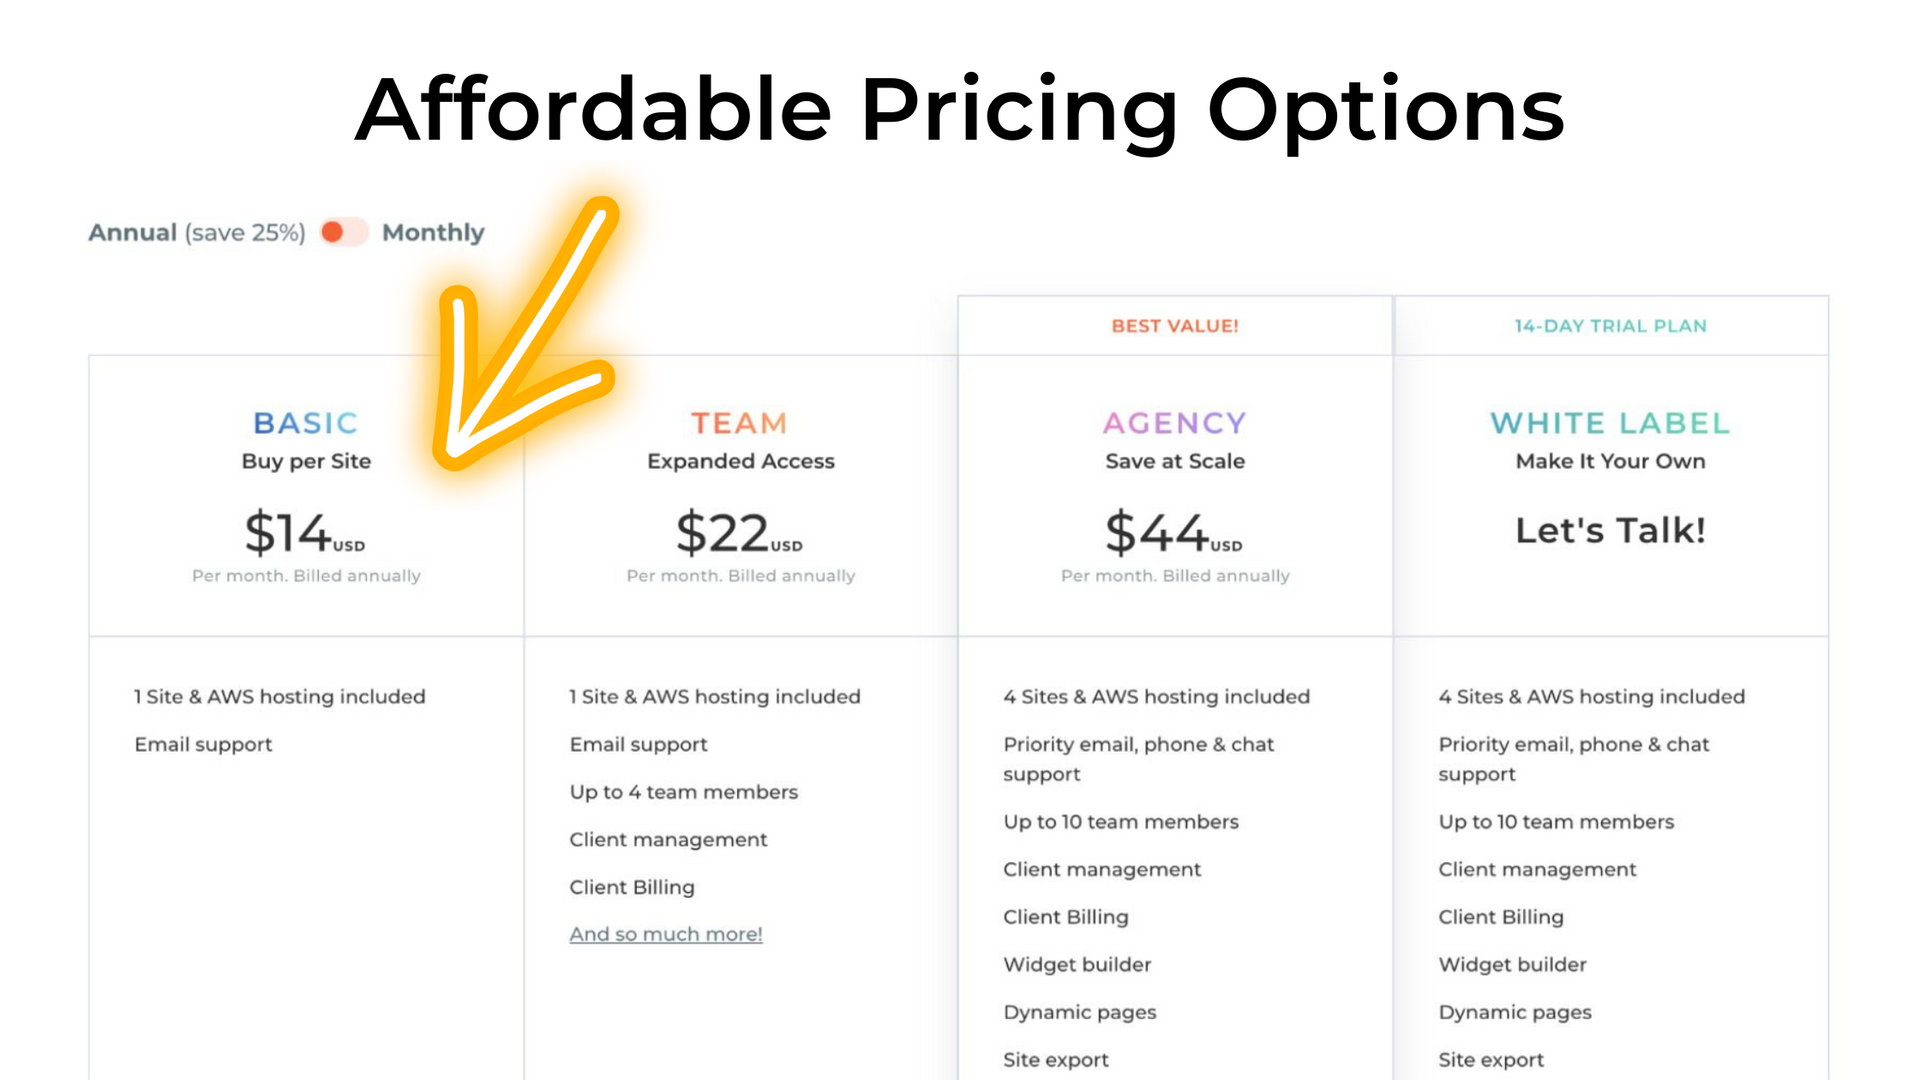 Affordable Pricing Options